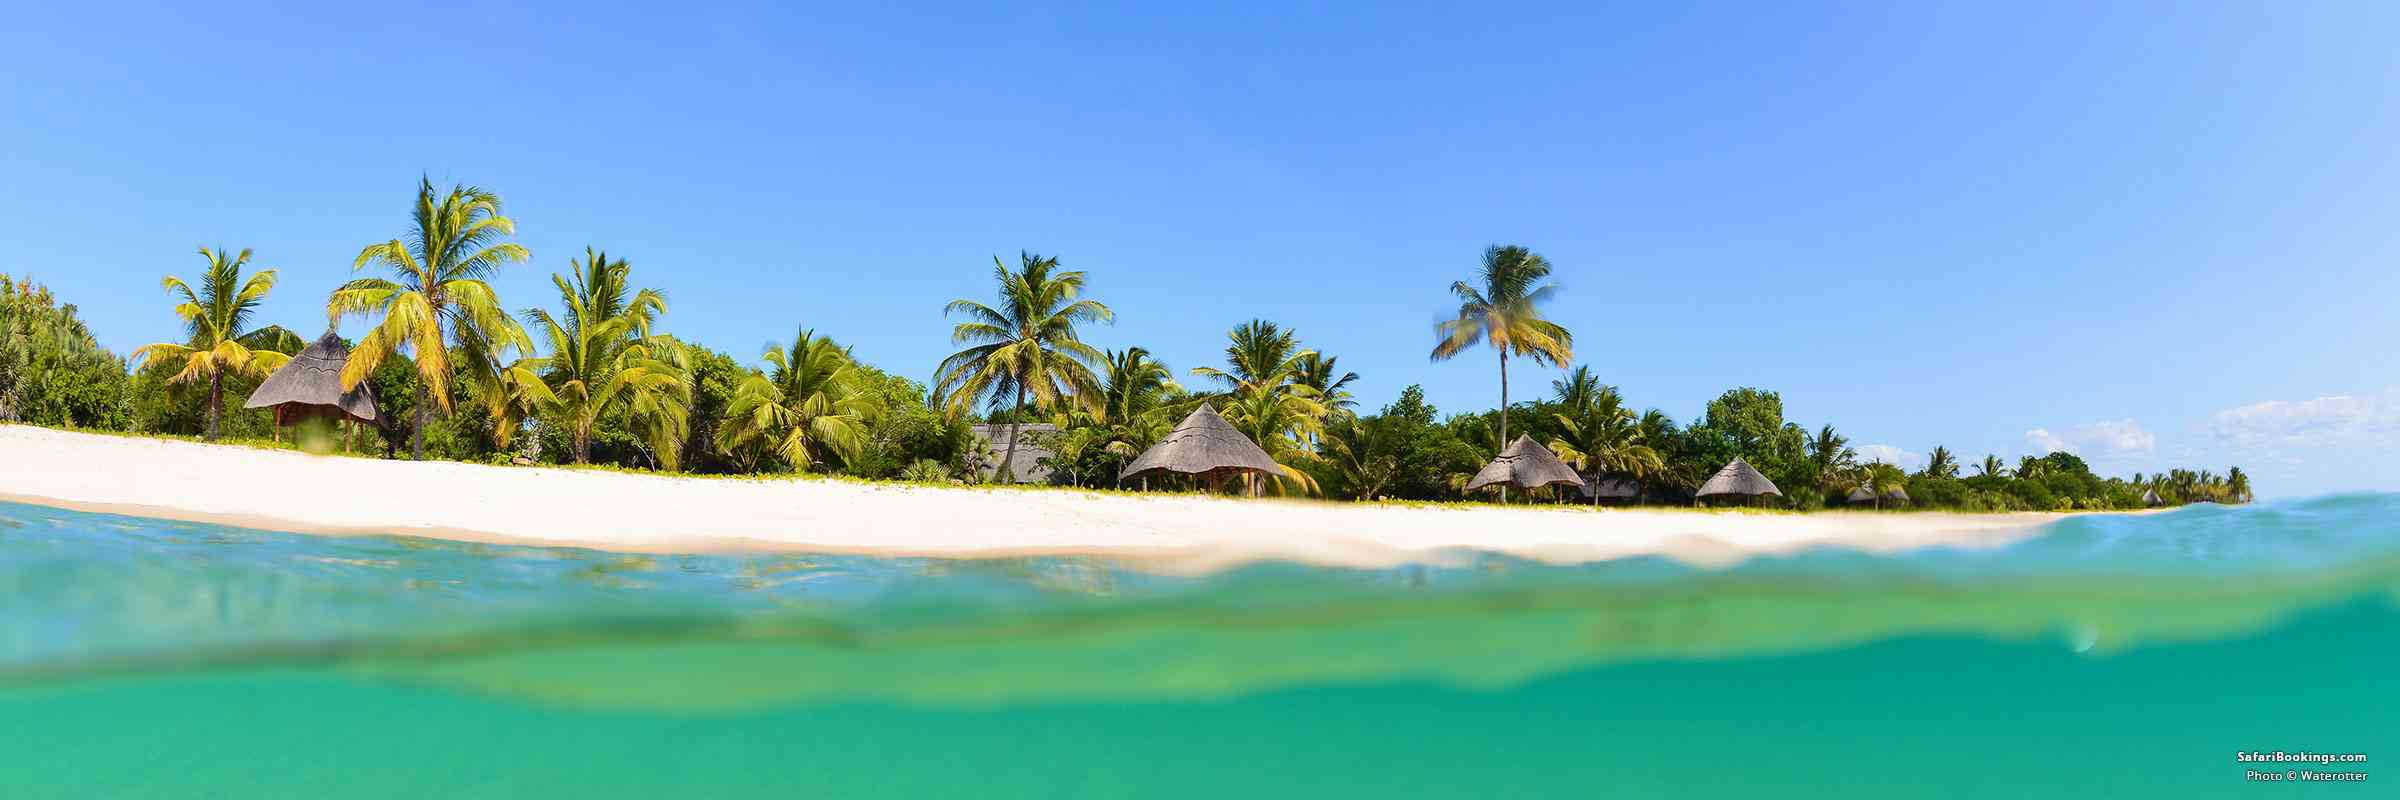 00 The 10 Best Things To Do In Mozambique BW Header800px 